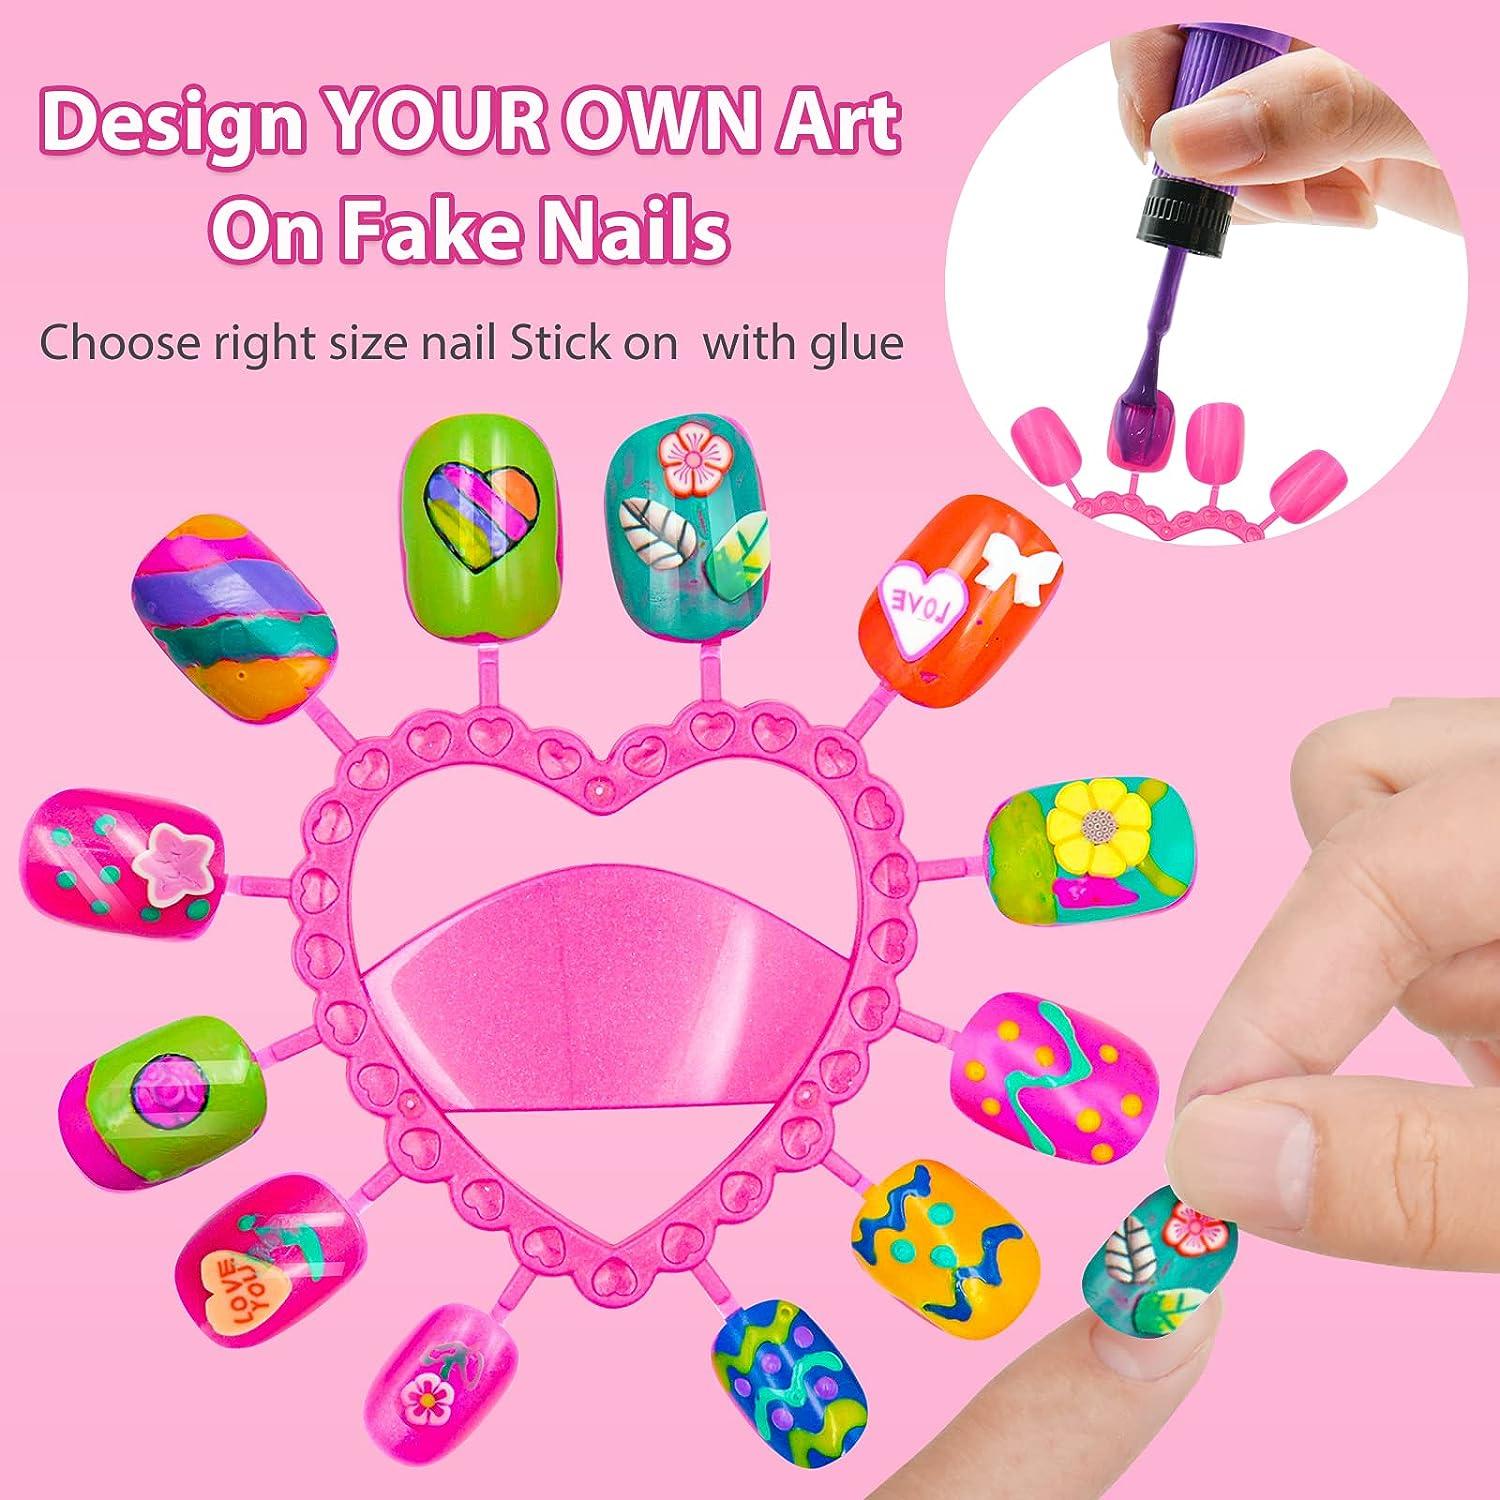  BATTOP Kids Nail Polish Set Girls Nail Art Kit with Polish,  Pen, Glitter, Nail Art Sticker and 3D Decoration, Cool Gifts Ideas for Girls  Ages 7-15 : Beauty & Personal Care